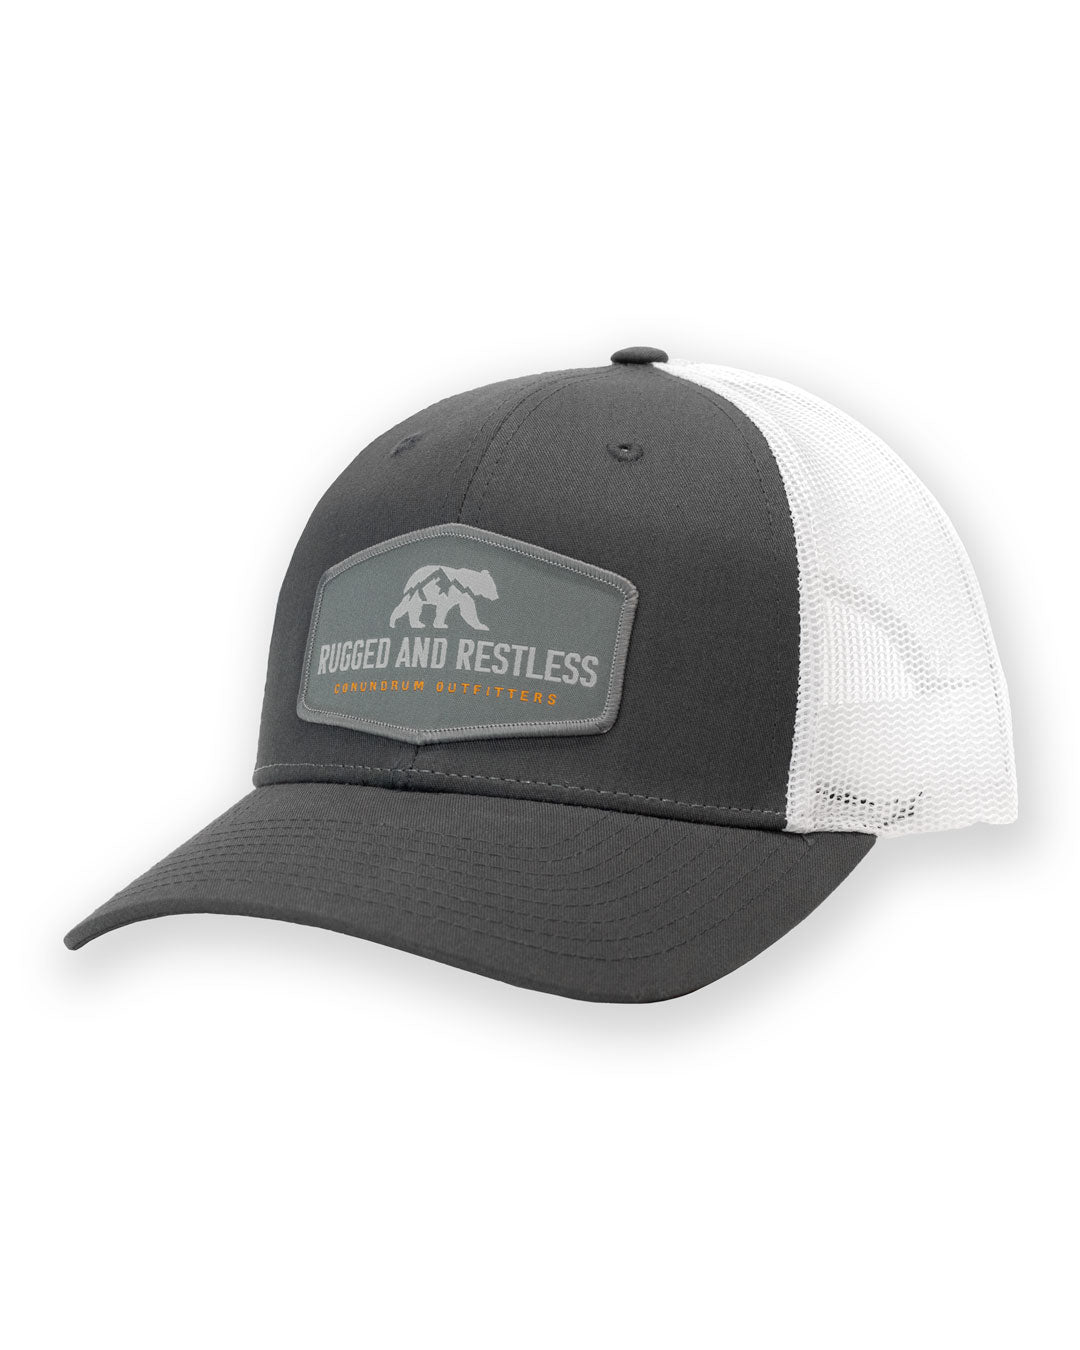 Rugged Low Profile trucker hat grey and white